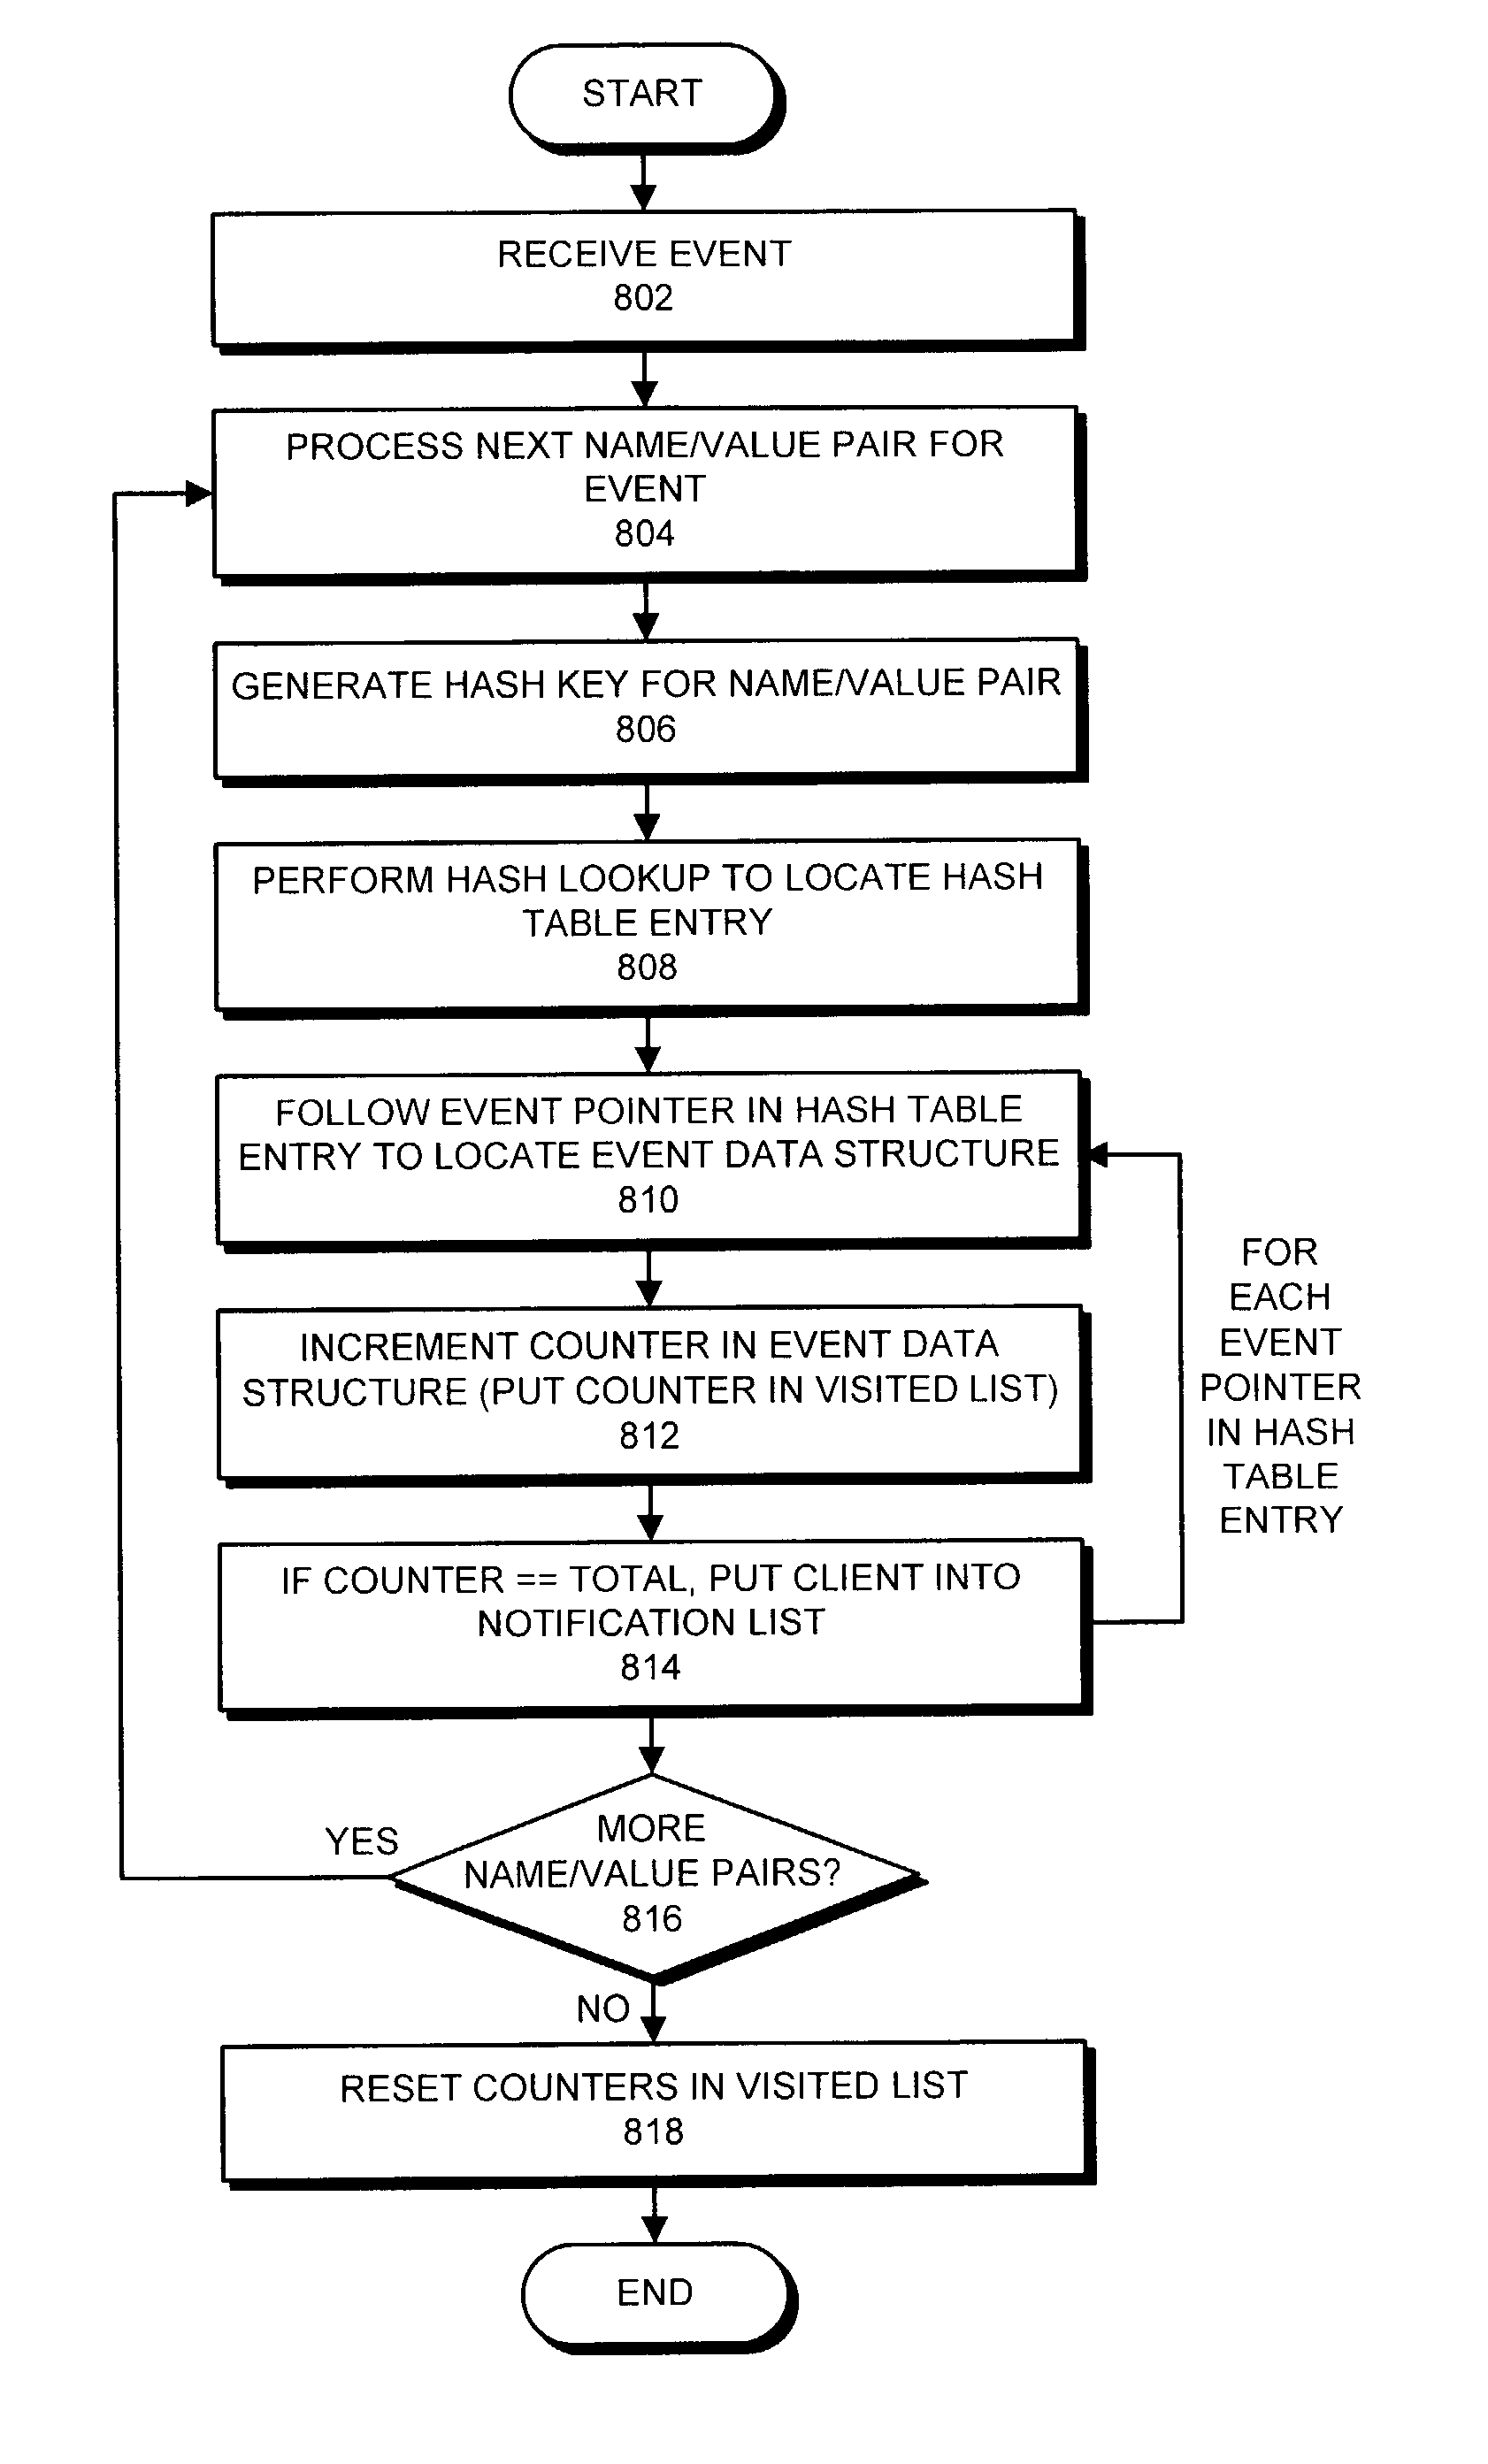 Facilitating event notification through use of an inverse mapping structure for subset determination